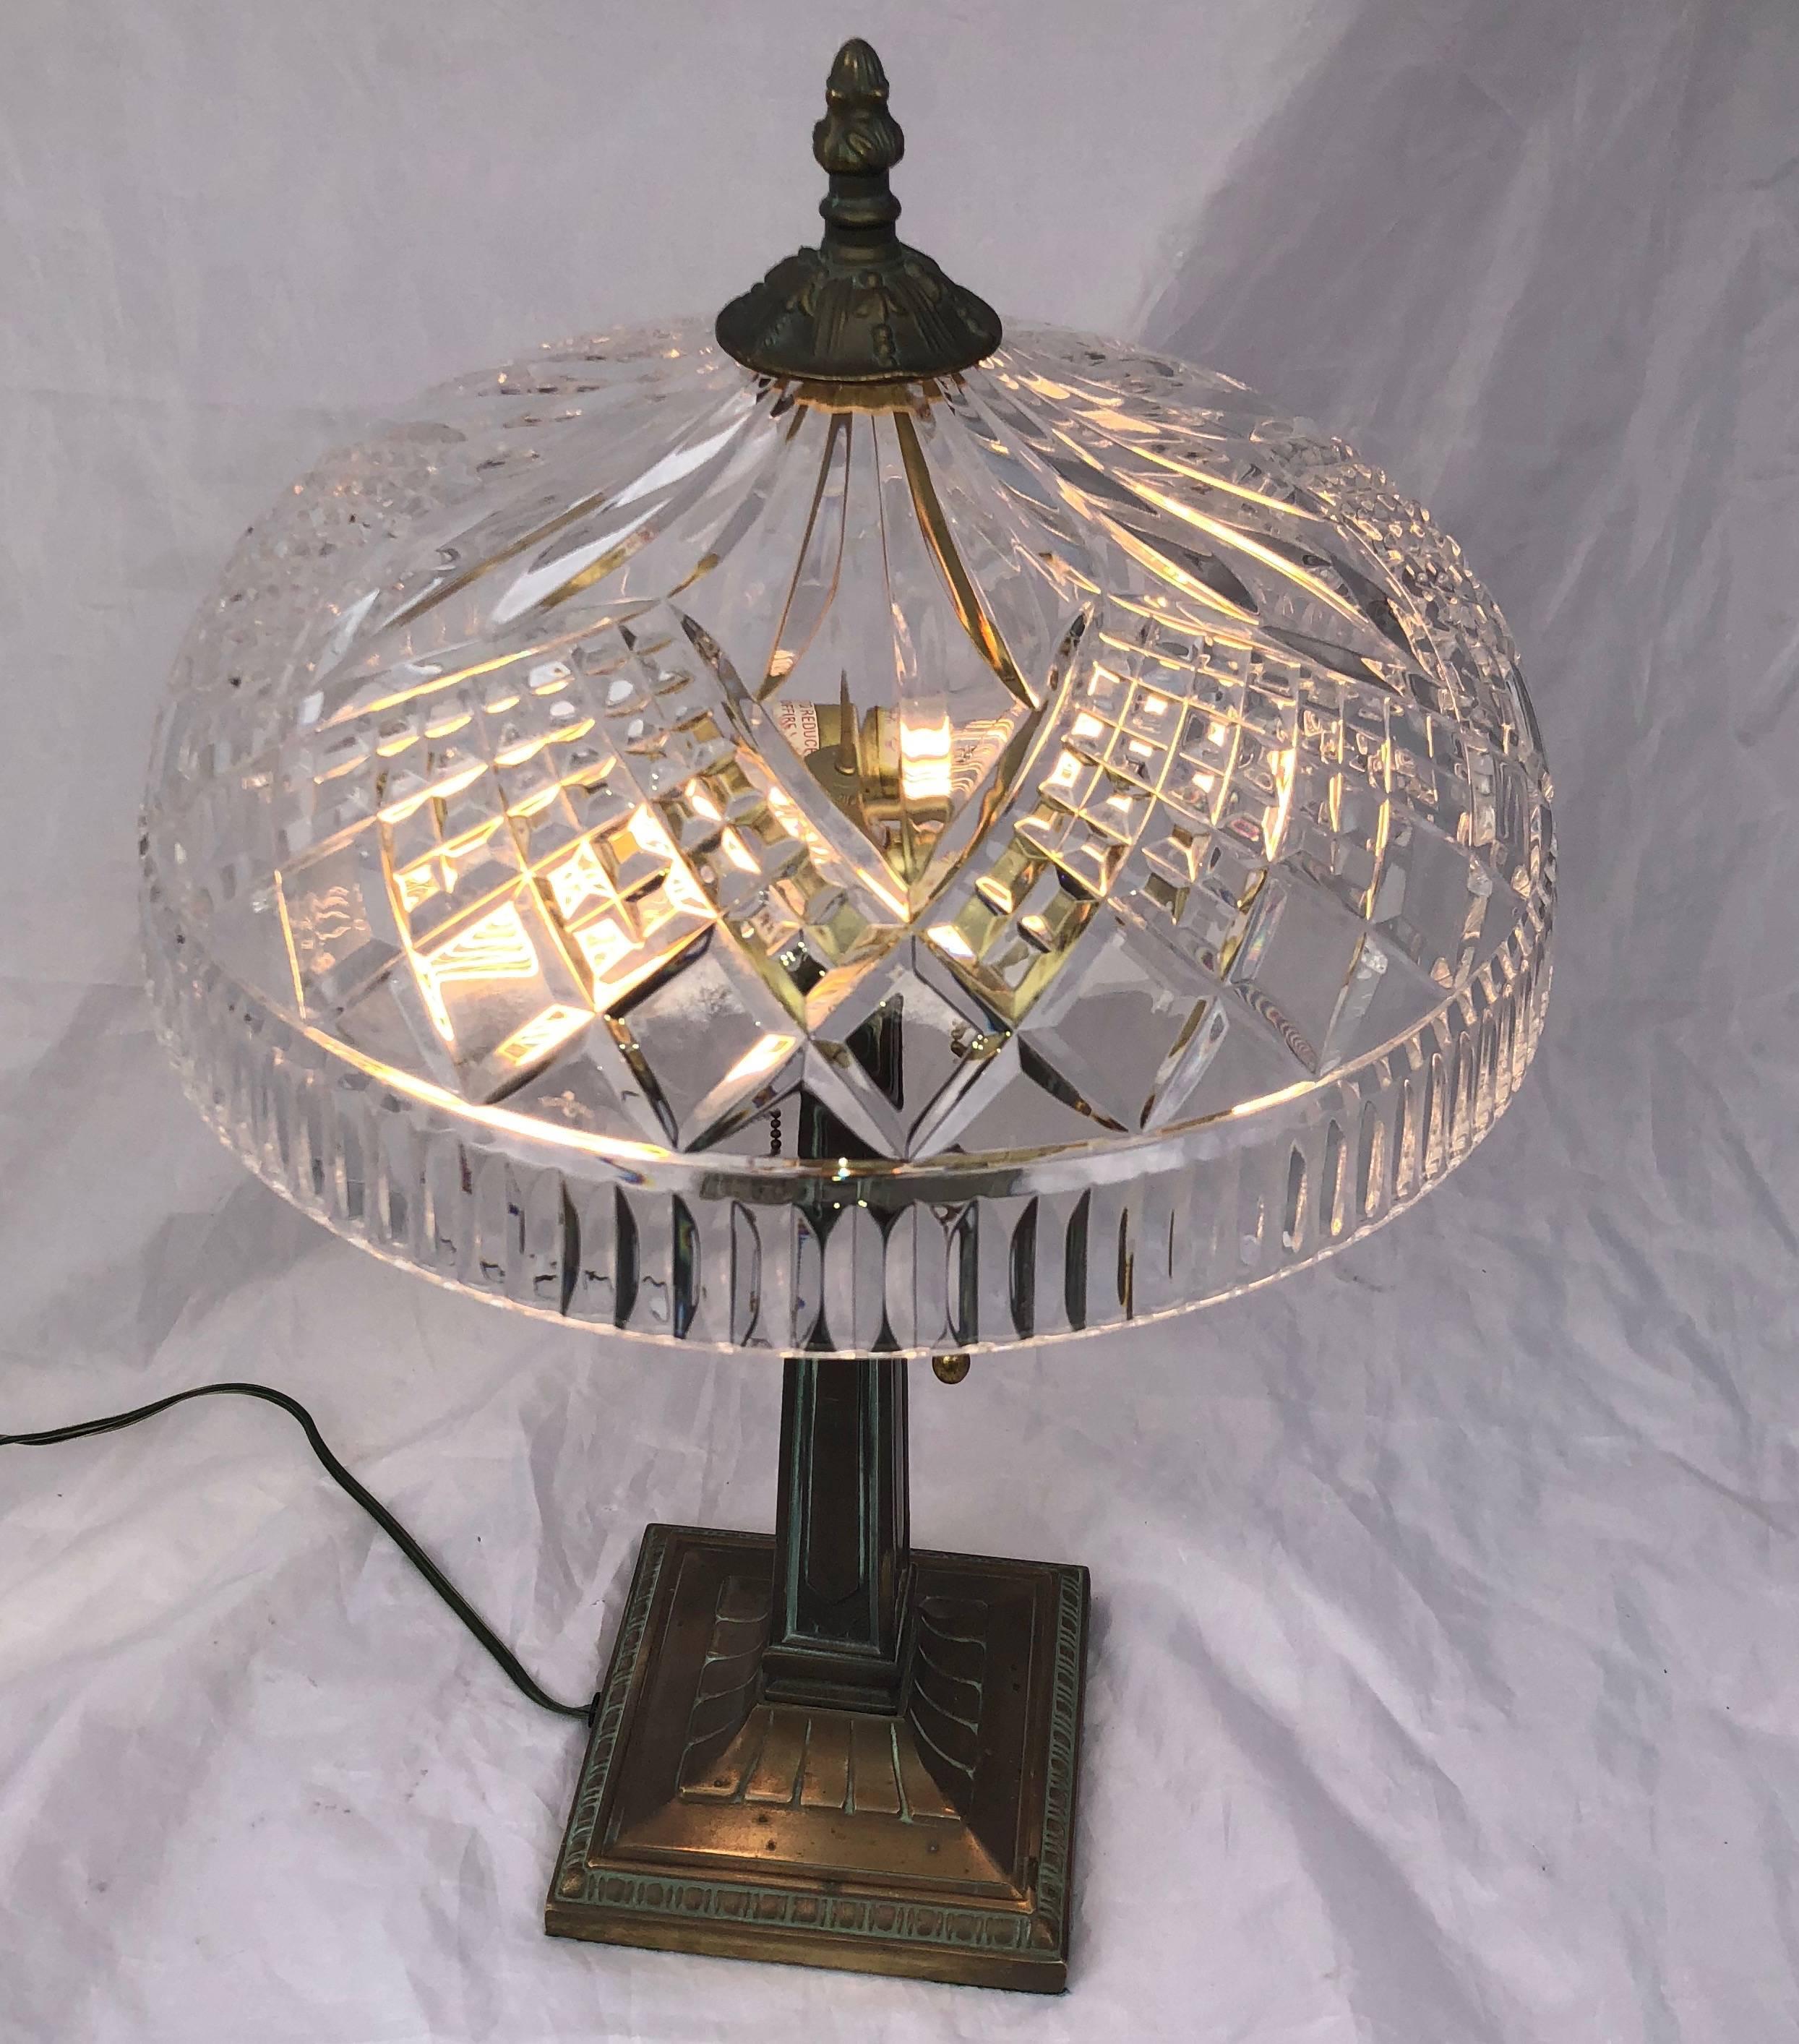 waterford lamp shades